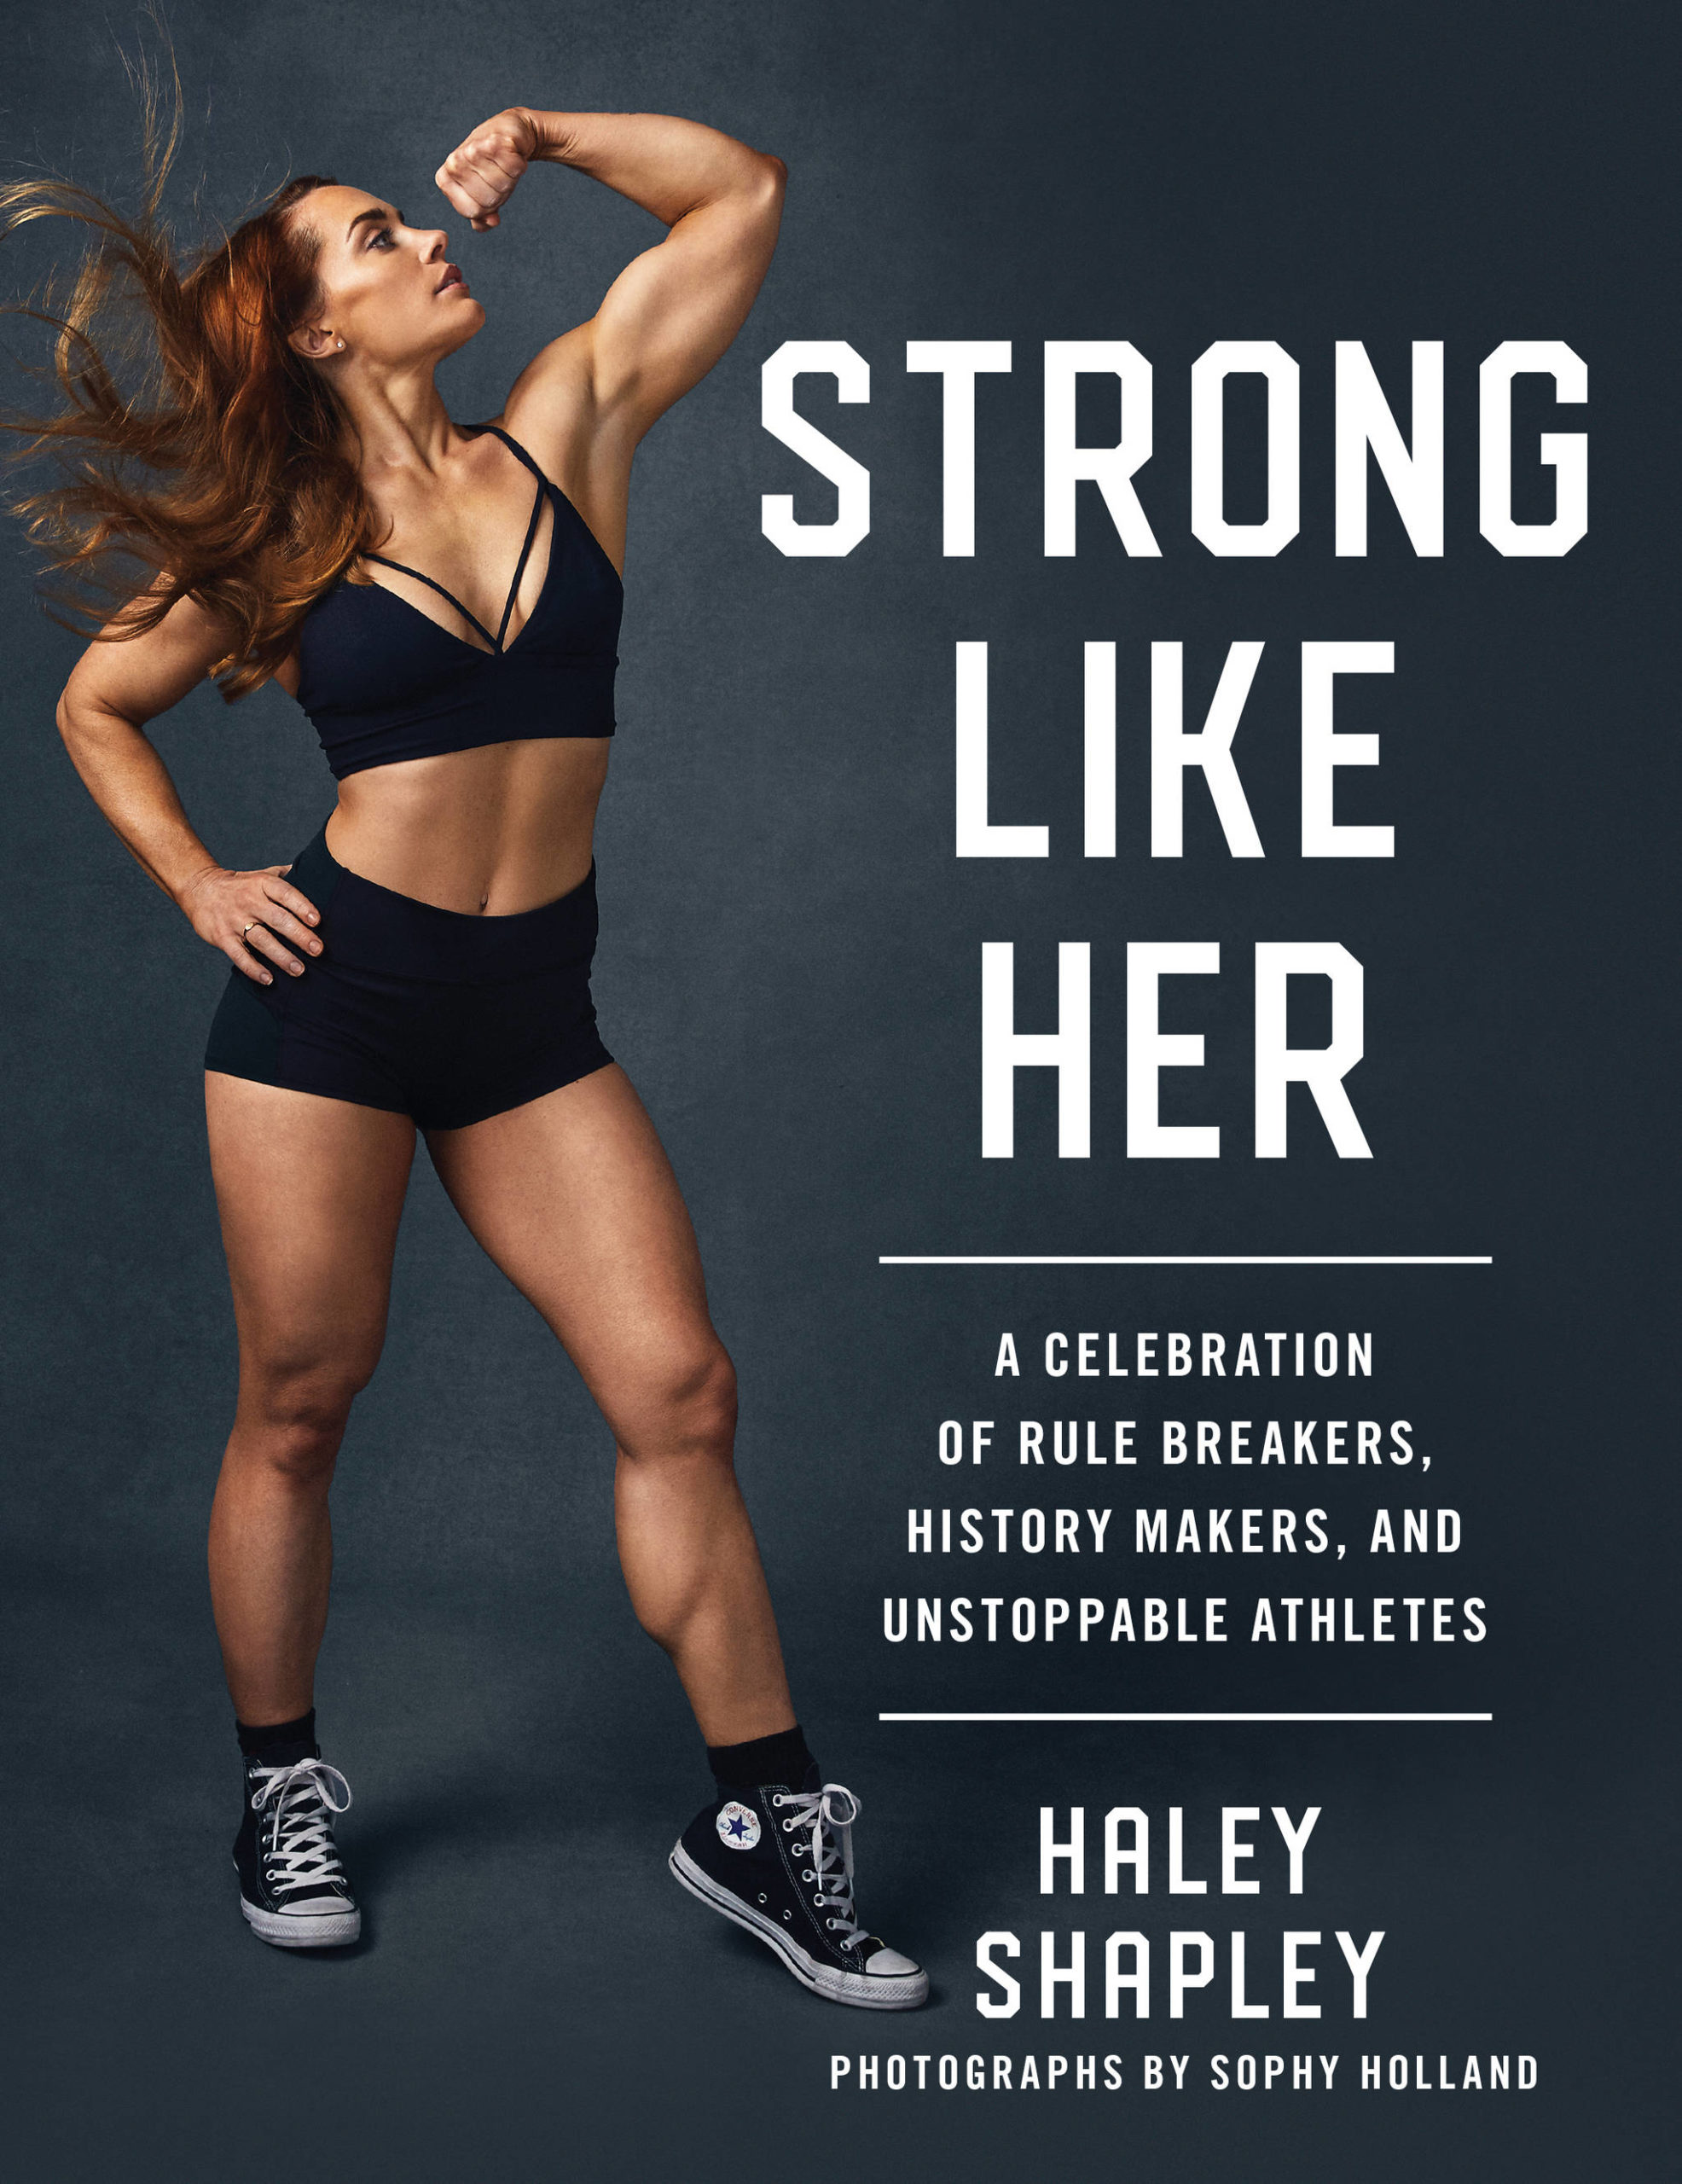 Kitsap native Haley Shapley features strong women in “Strong Like